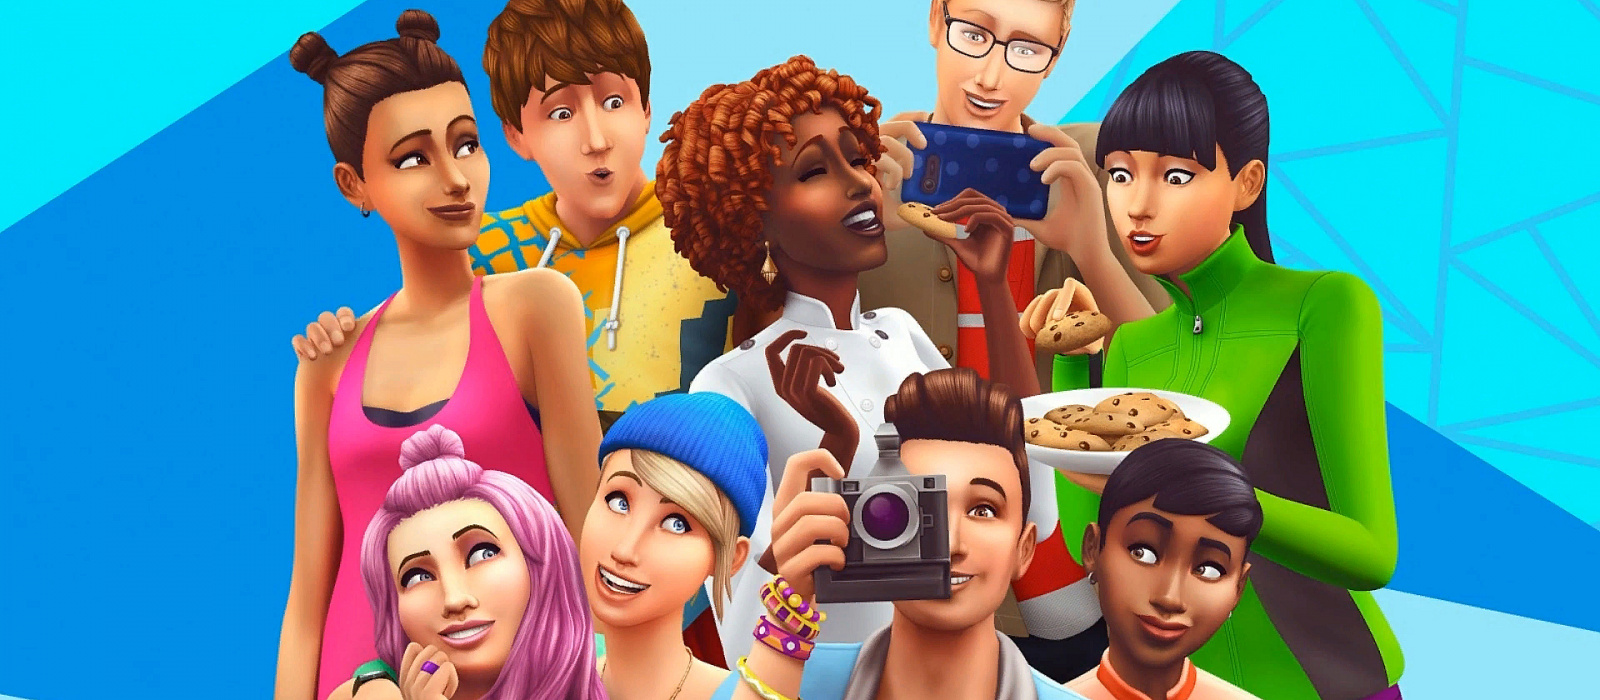 SIMS 4 IS FREE NOW! PLAY WITH FRIENDS WITH MULTIPLAYER MOD (SETUP) 